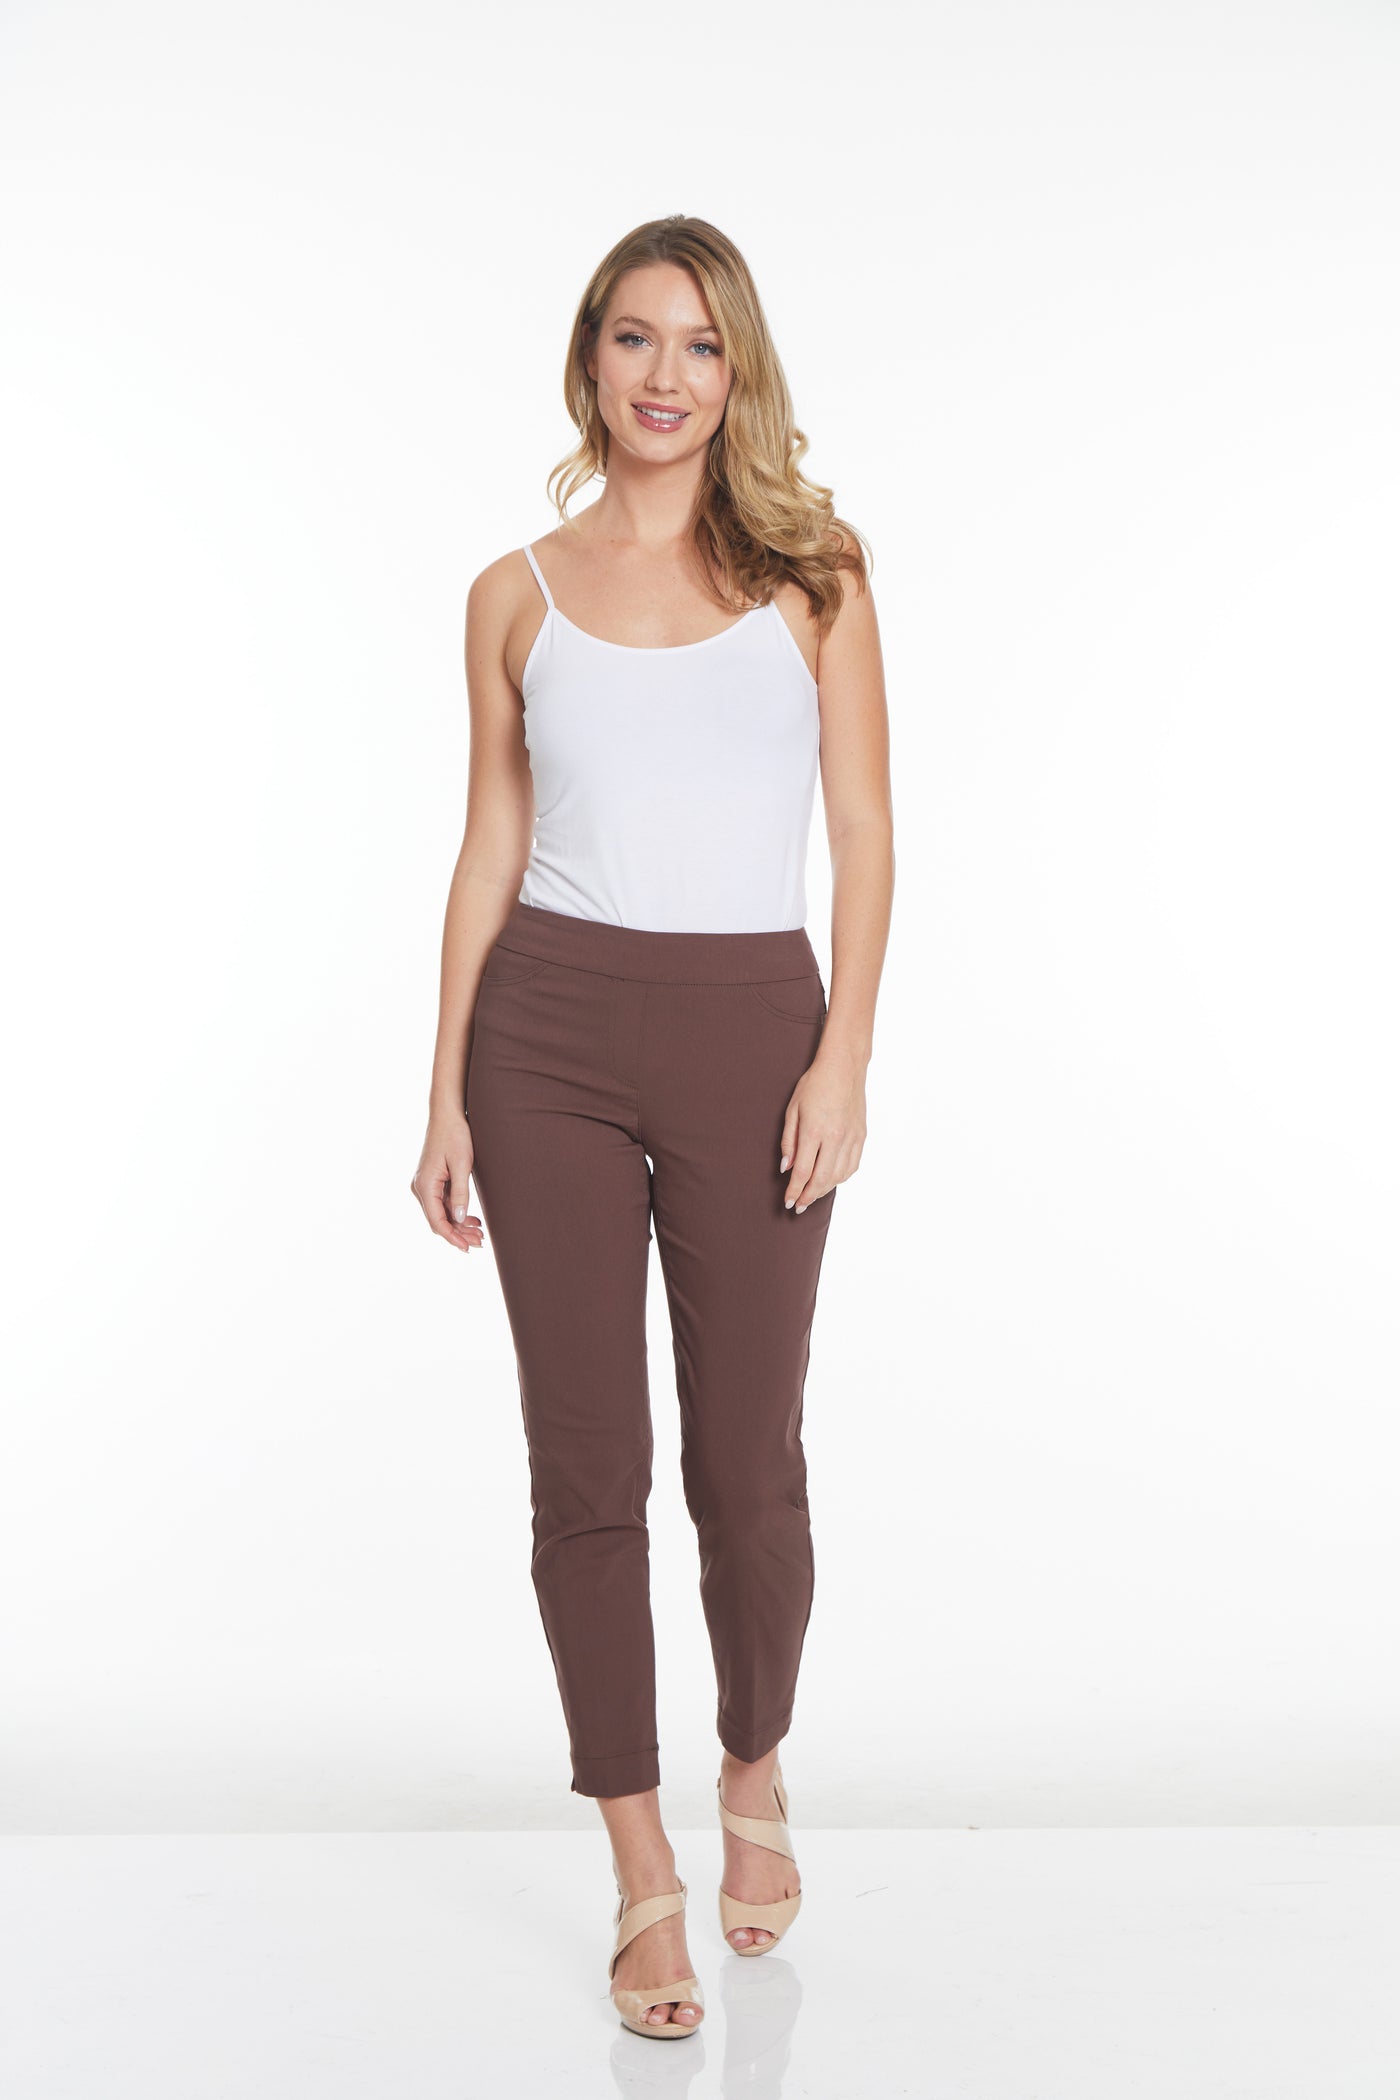 PULL-ON ANKLE PANT - Mocha